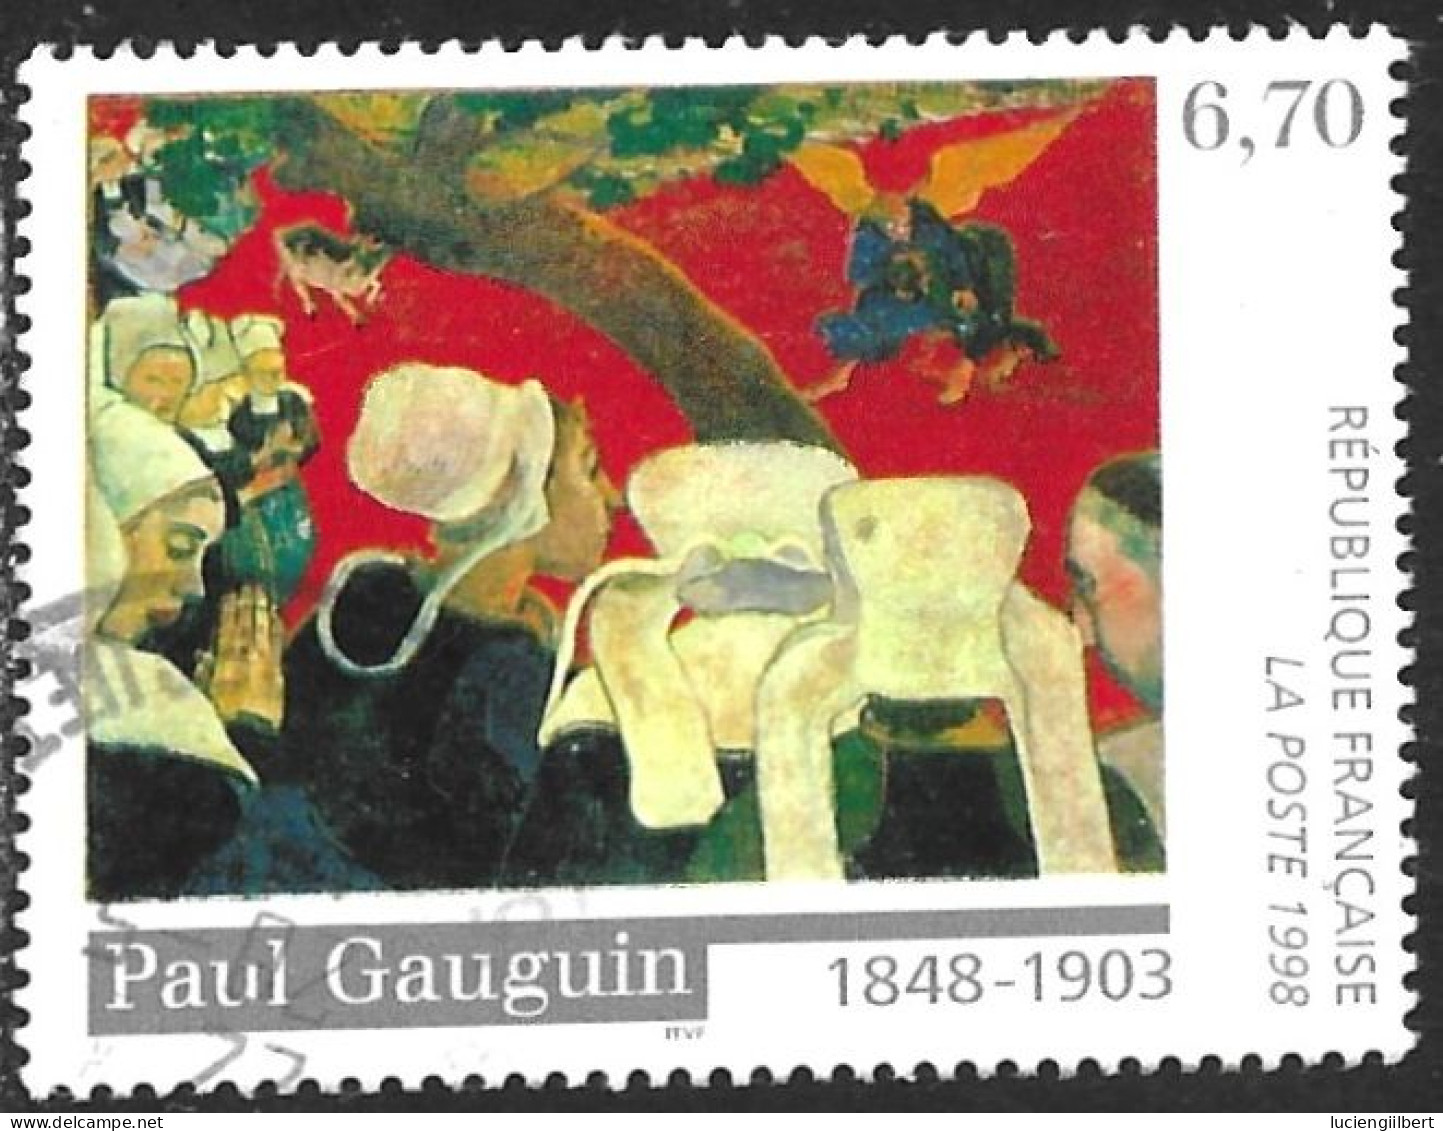 TIMBRE N° 3207  -  TABLEAU GAUGUIN  -  OBLITERE  -  1998 - Used Stamps